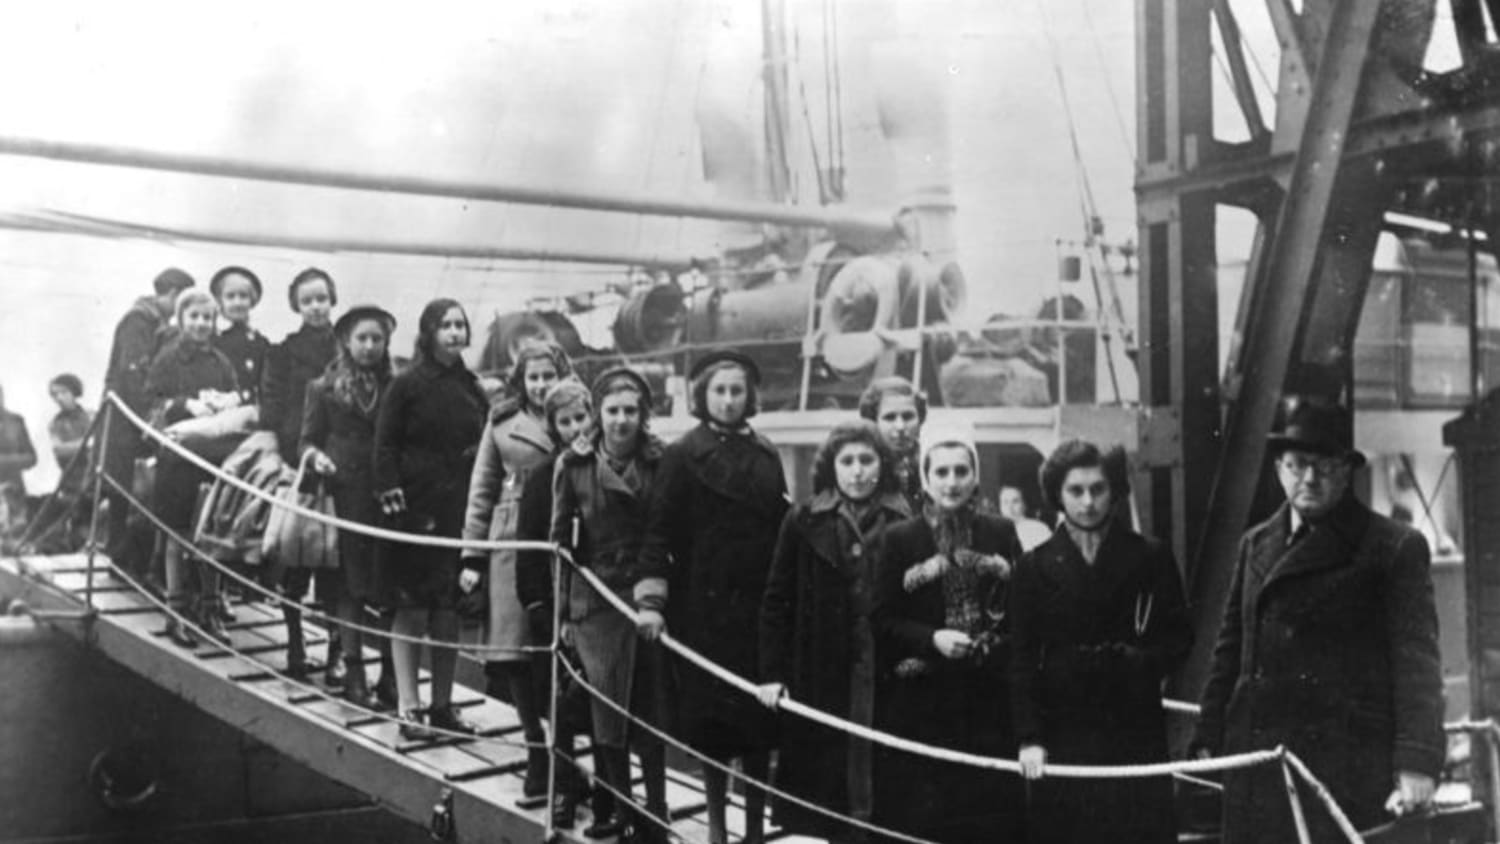 The Untold Truth Of The Forgotten Women Refugee Scientists Of WWII